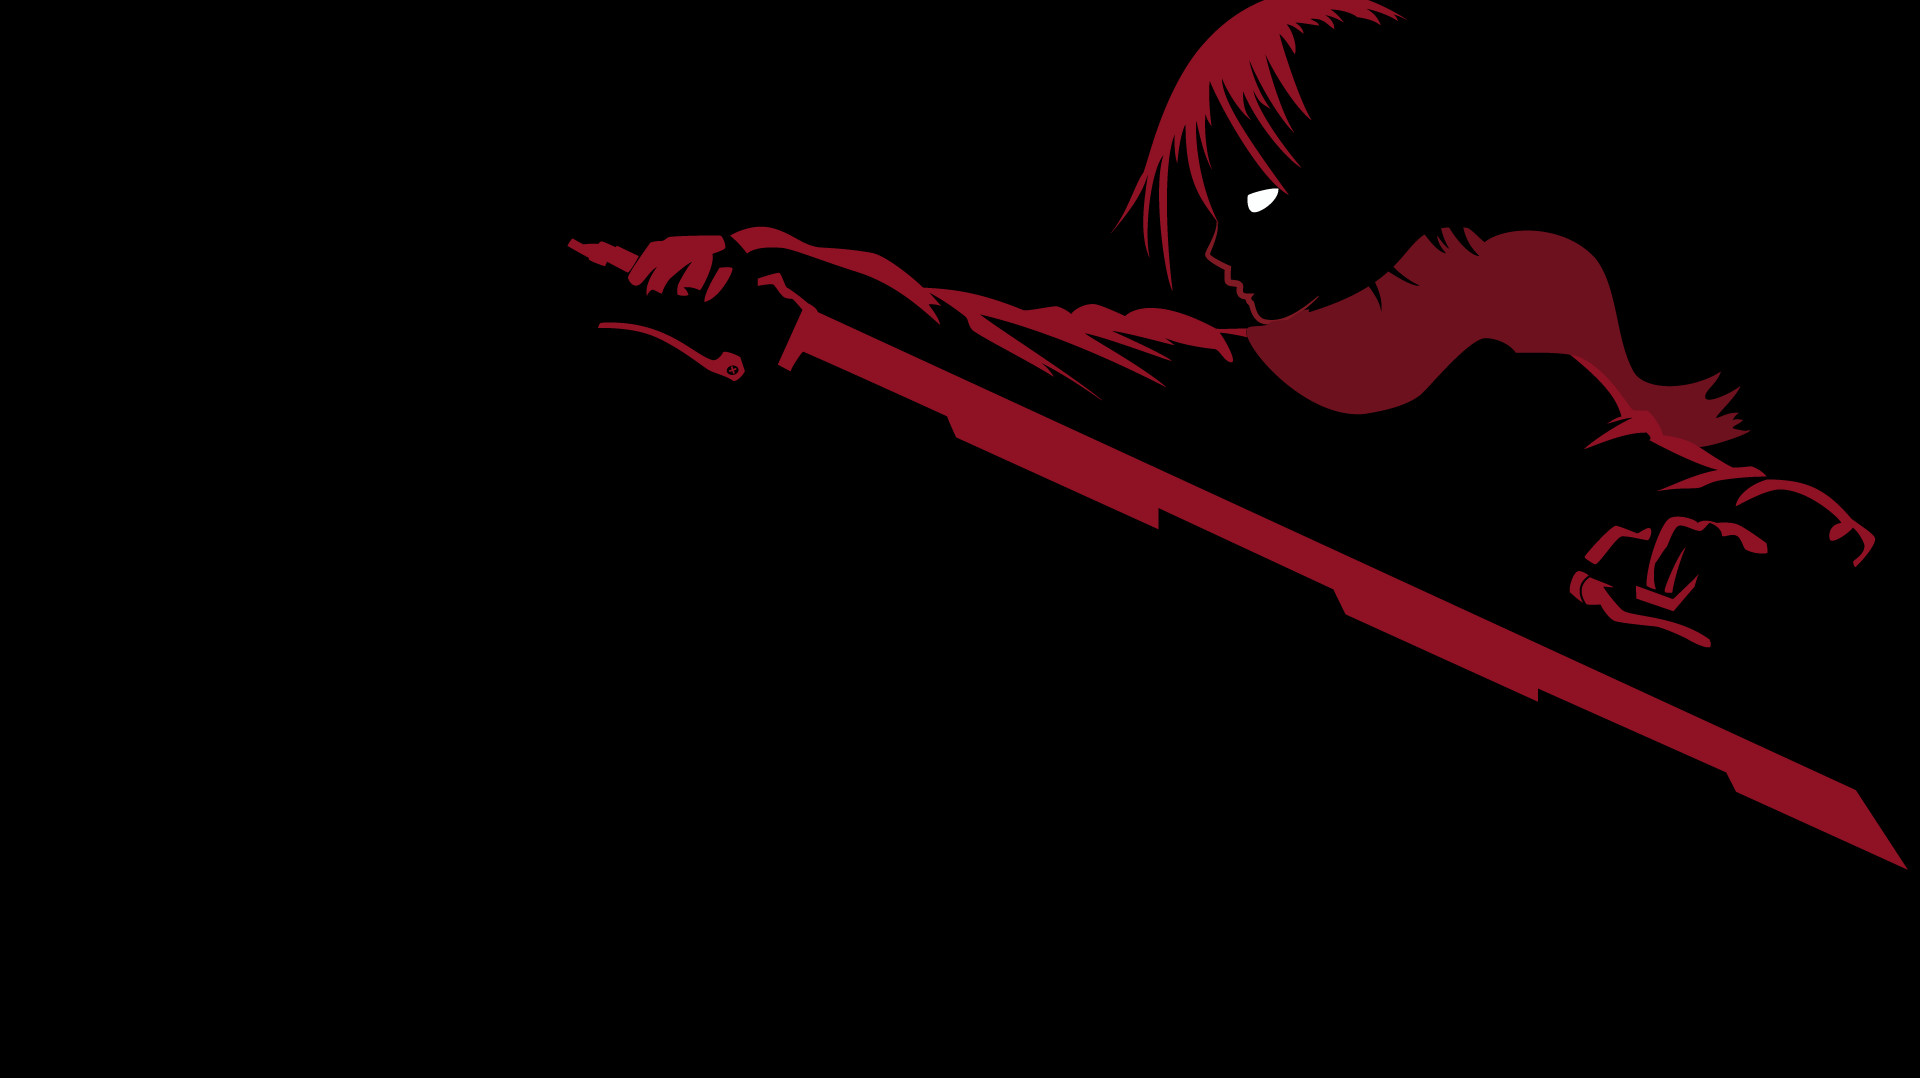 Red And Black Anime Wallpaper (72+ Images)